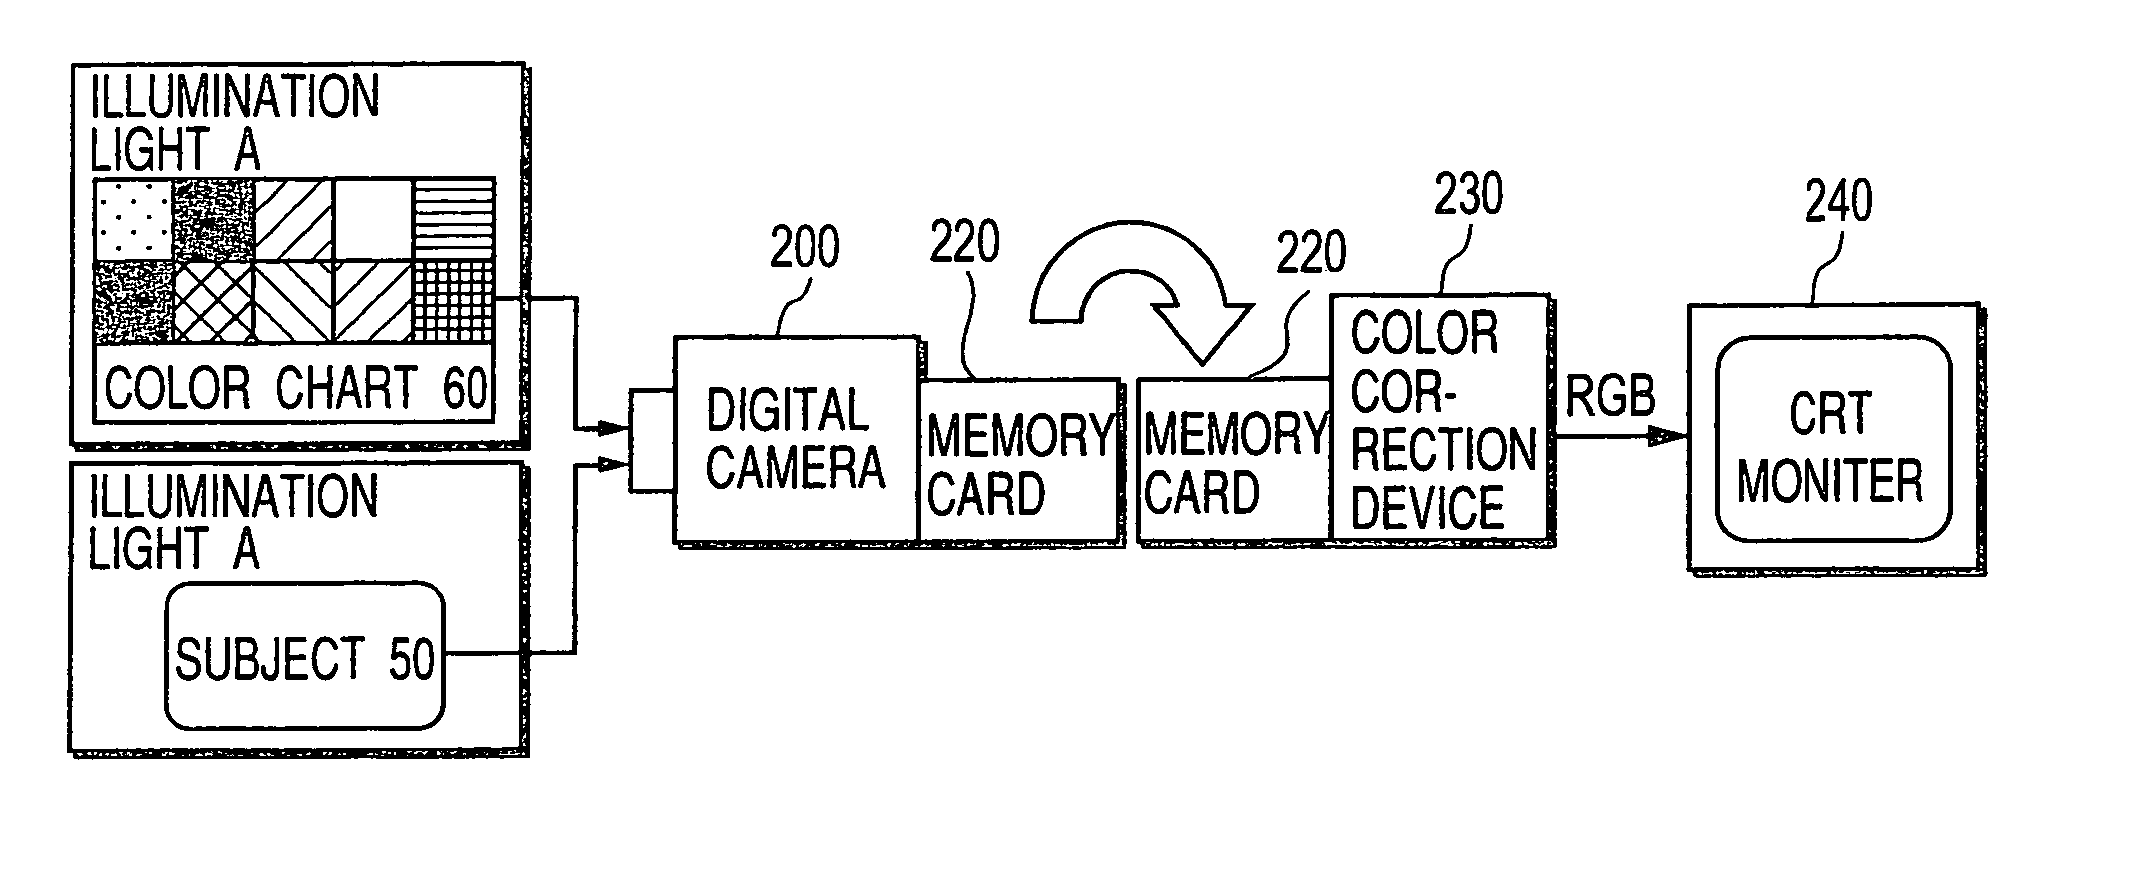 Color reproducing system capable of performing selection about whether or not predetermined processing is performed on color image data